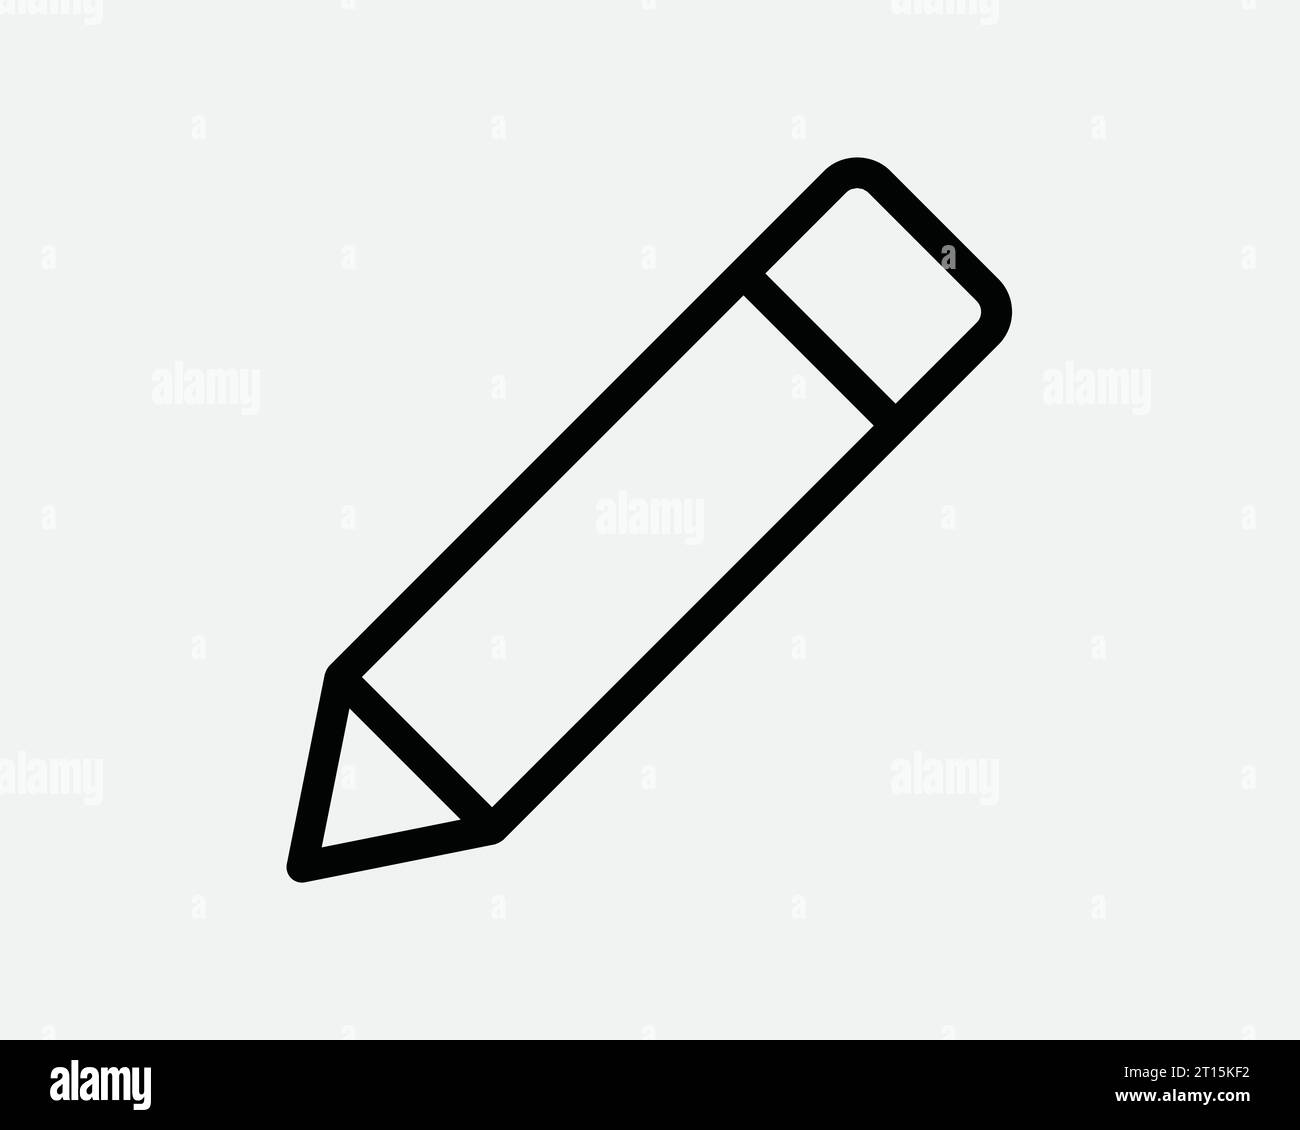 Pencil Edit Icon Pen Editor App Web Write Draw Art Drawing Tool Education School Office Business Black White Outline Line Shape Sign Symbol Vector Stock Vector